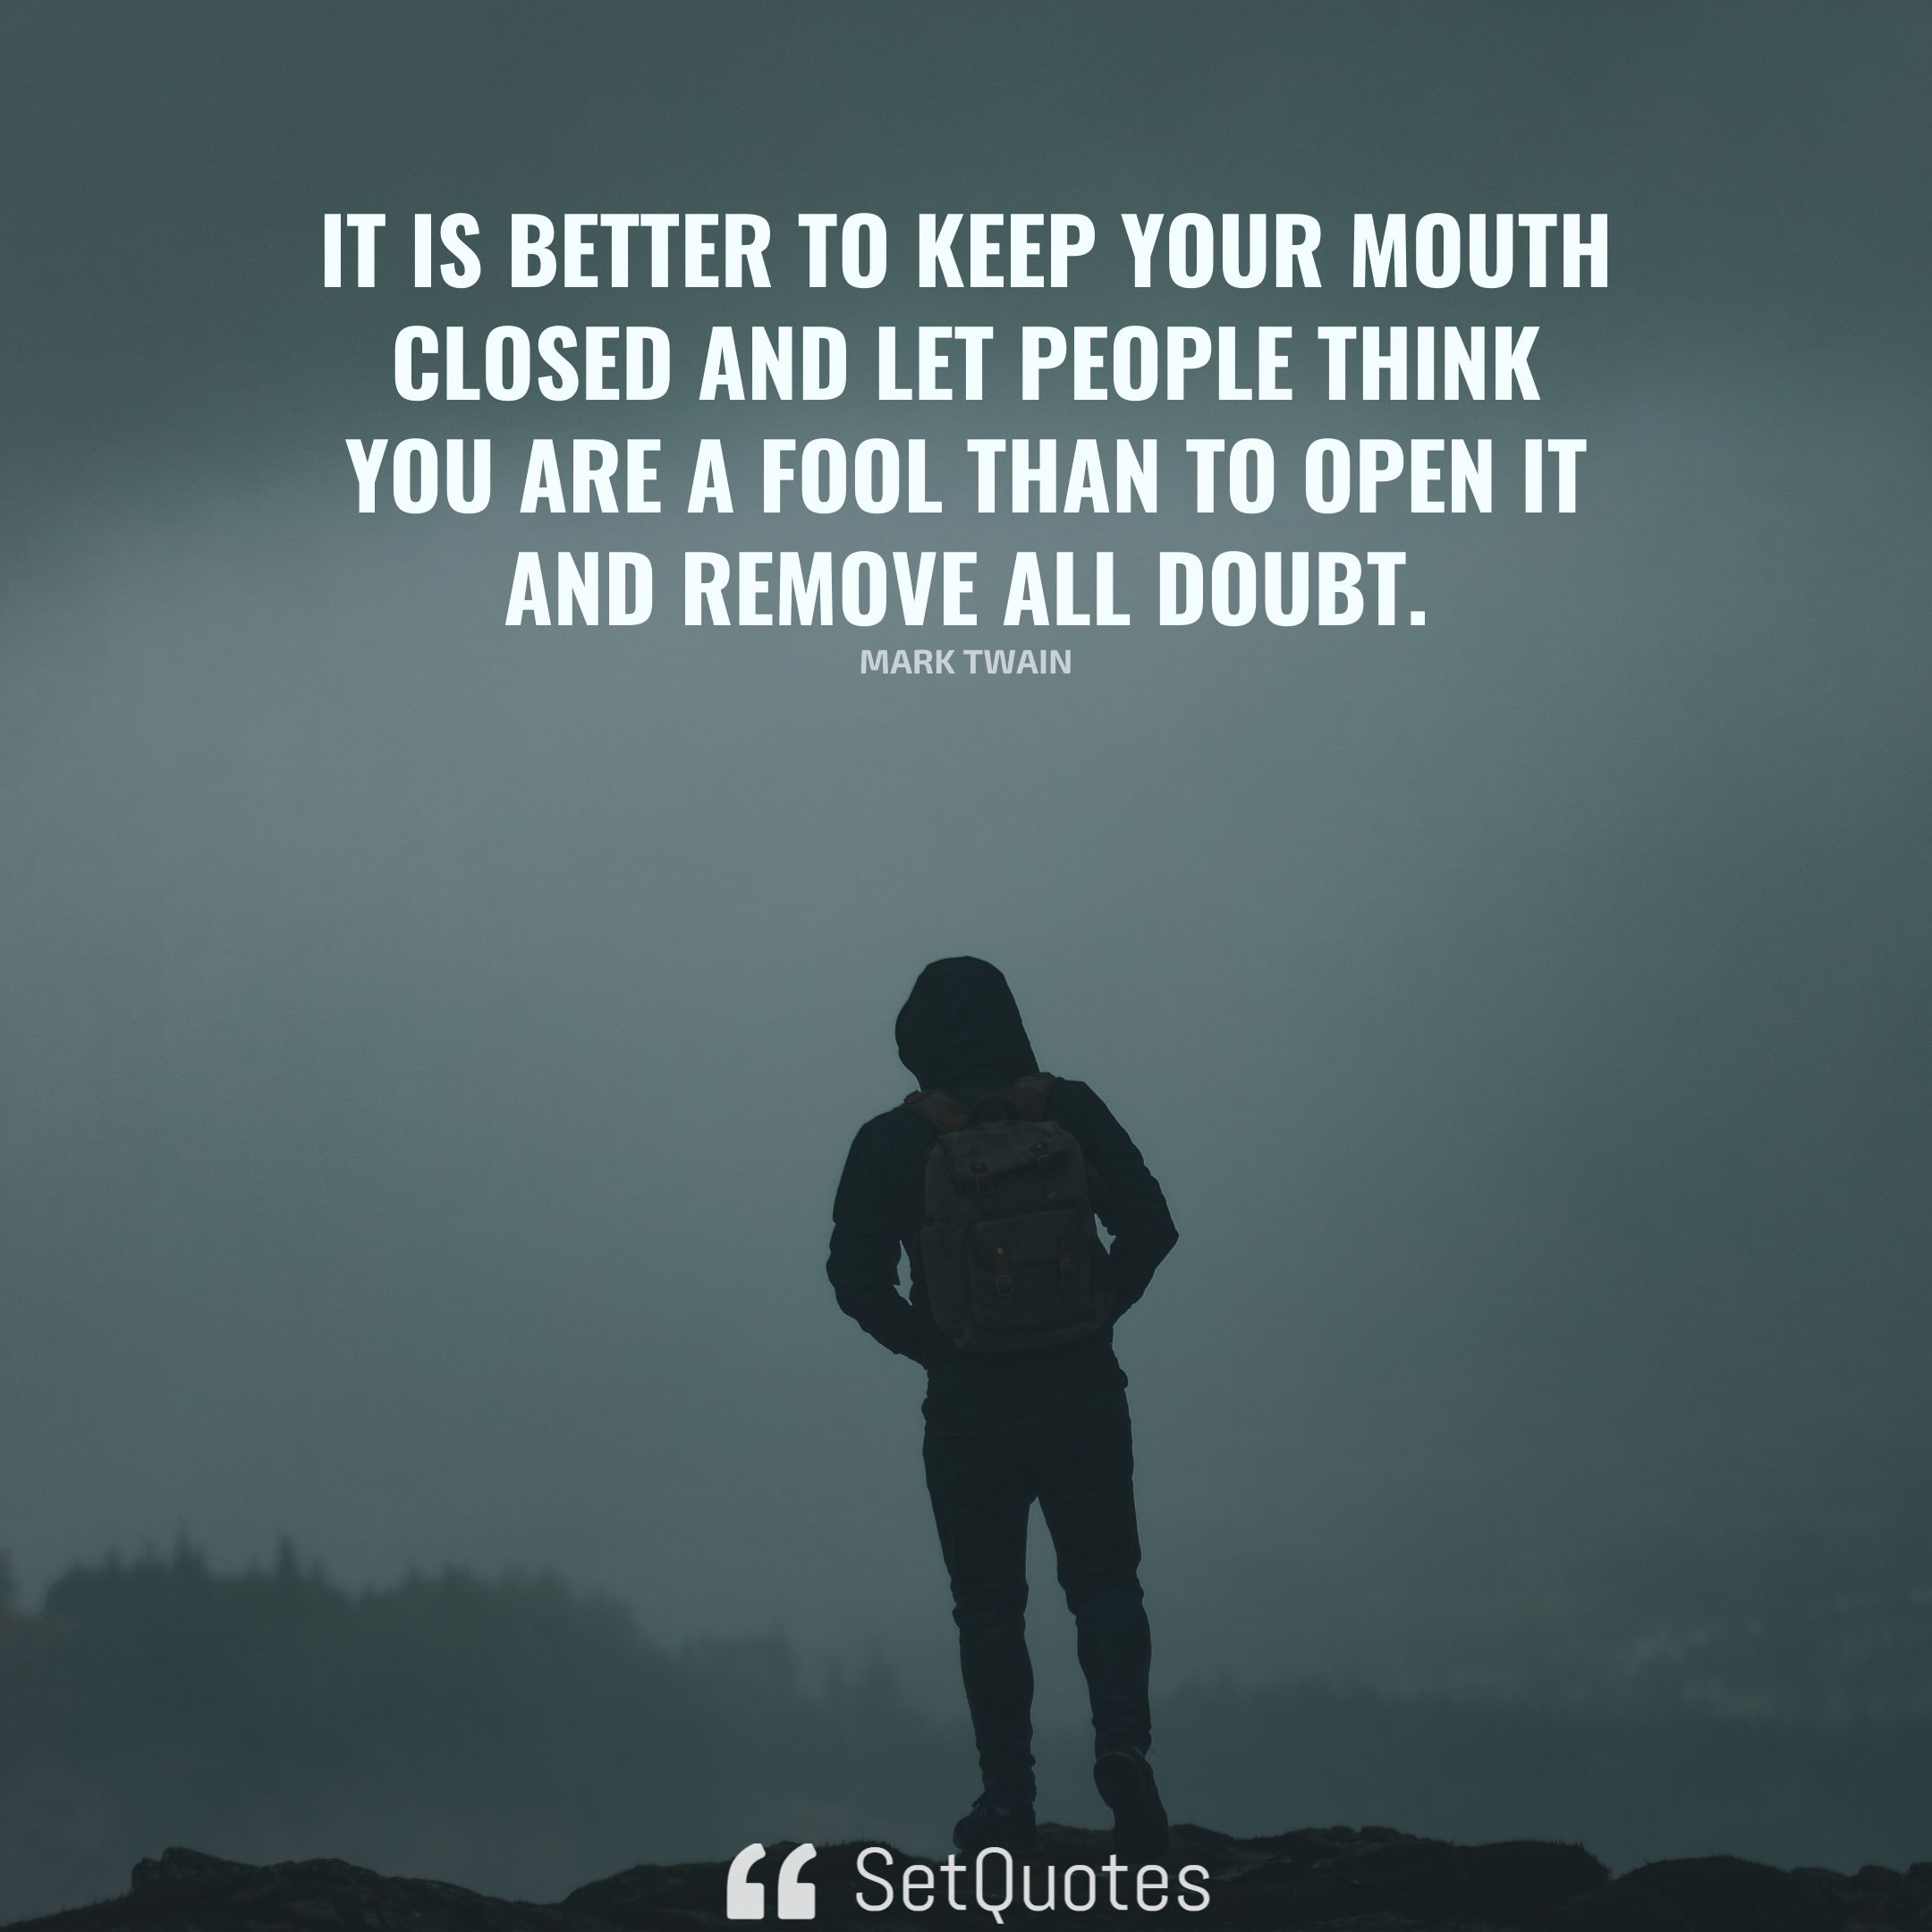 It is better to keep your mouth closed and let people think you are a fool.